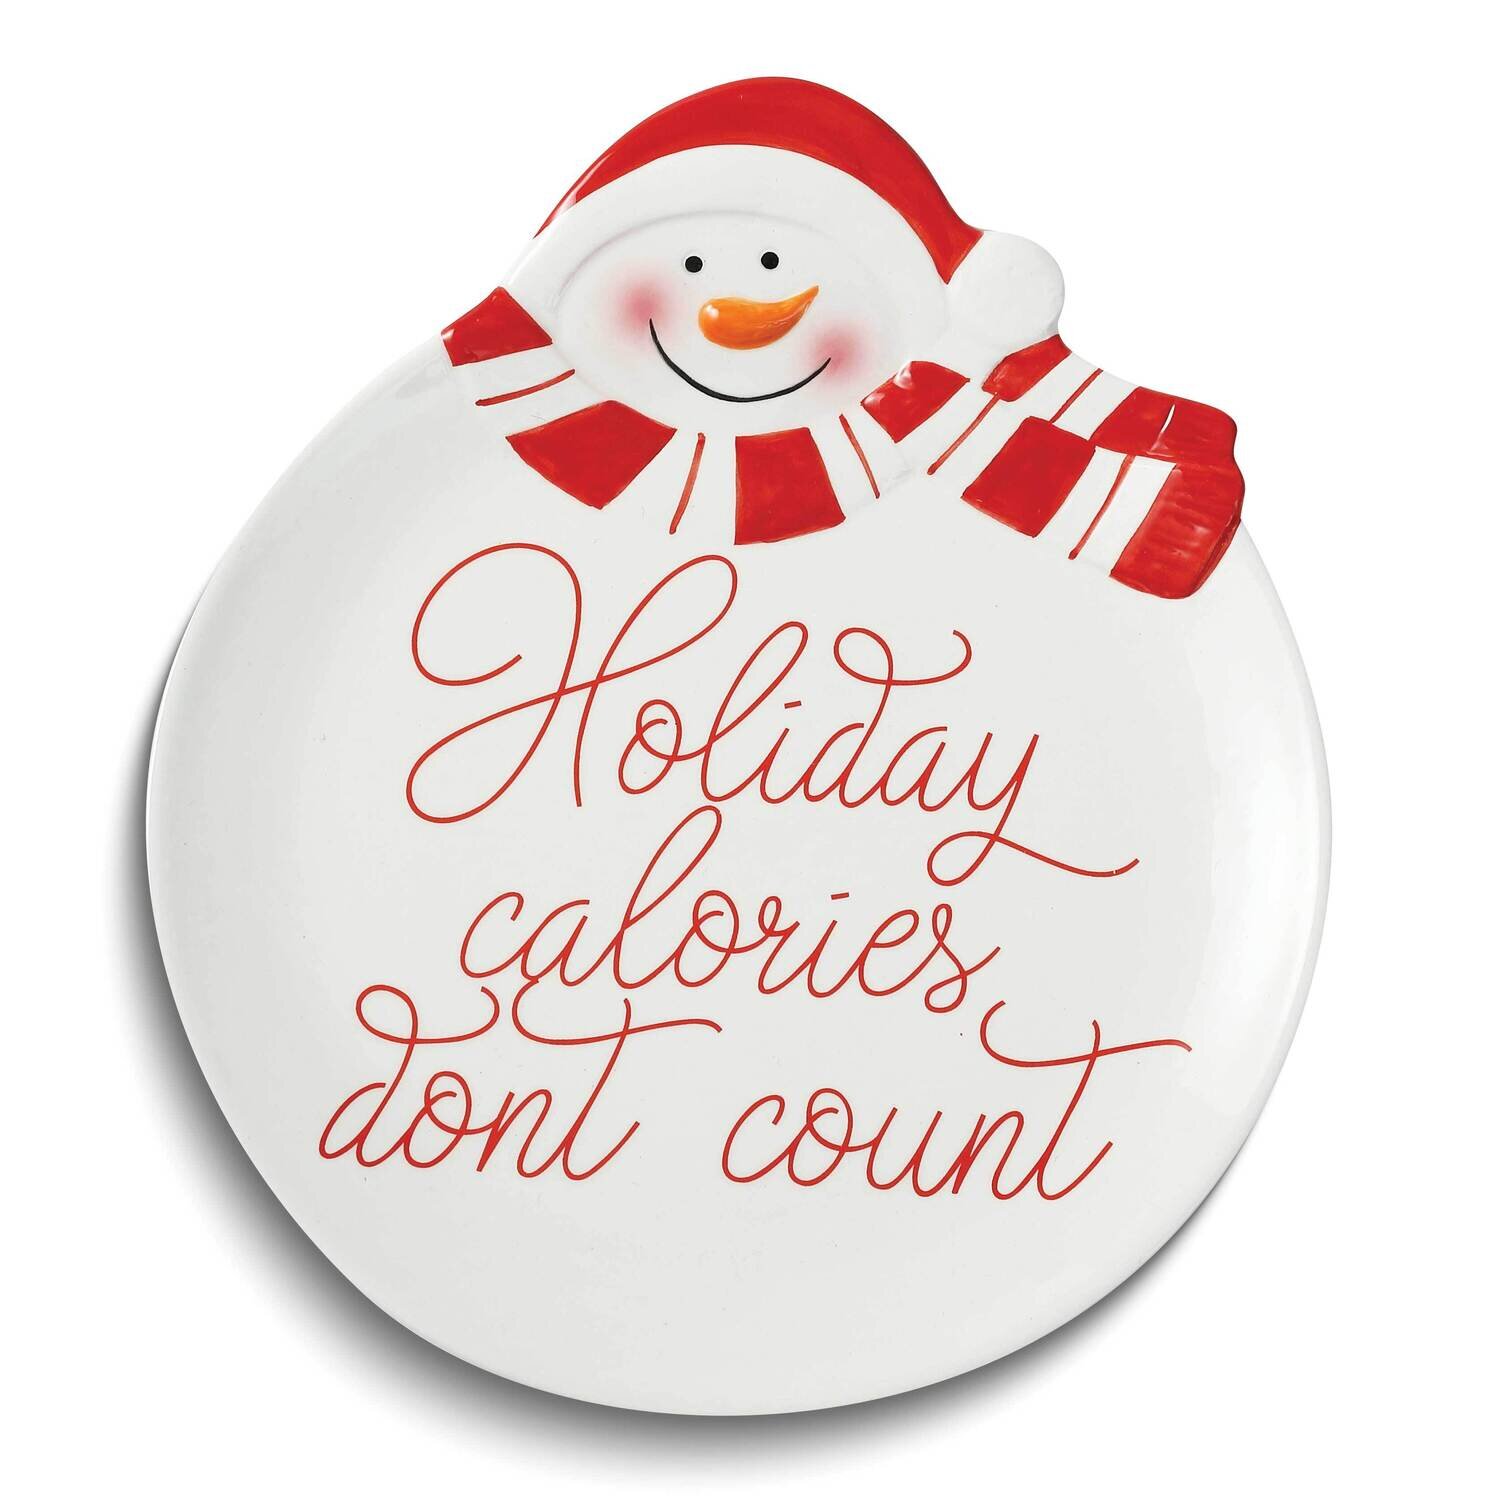 Snowman Holiday Calories Don't Count Ceramic Cookie Plate GM25269